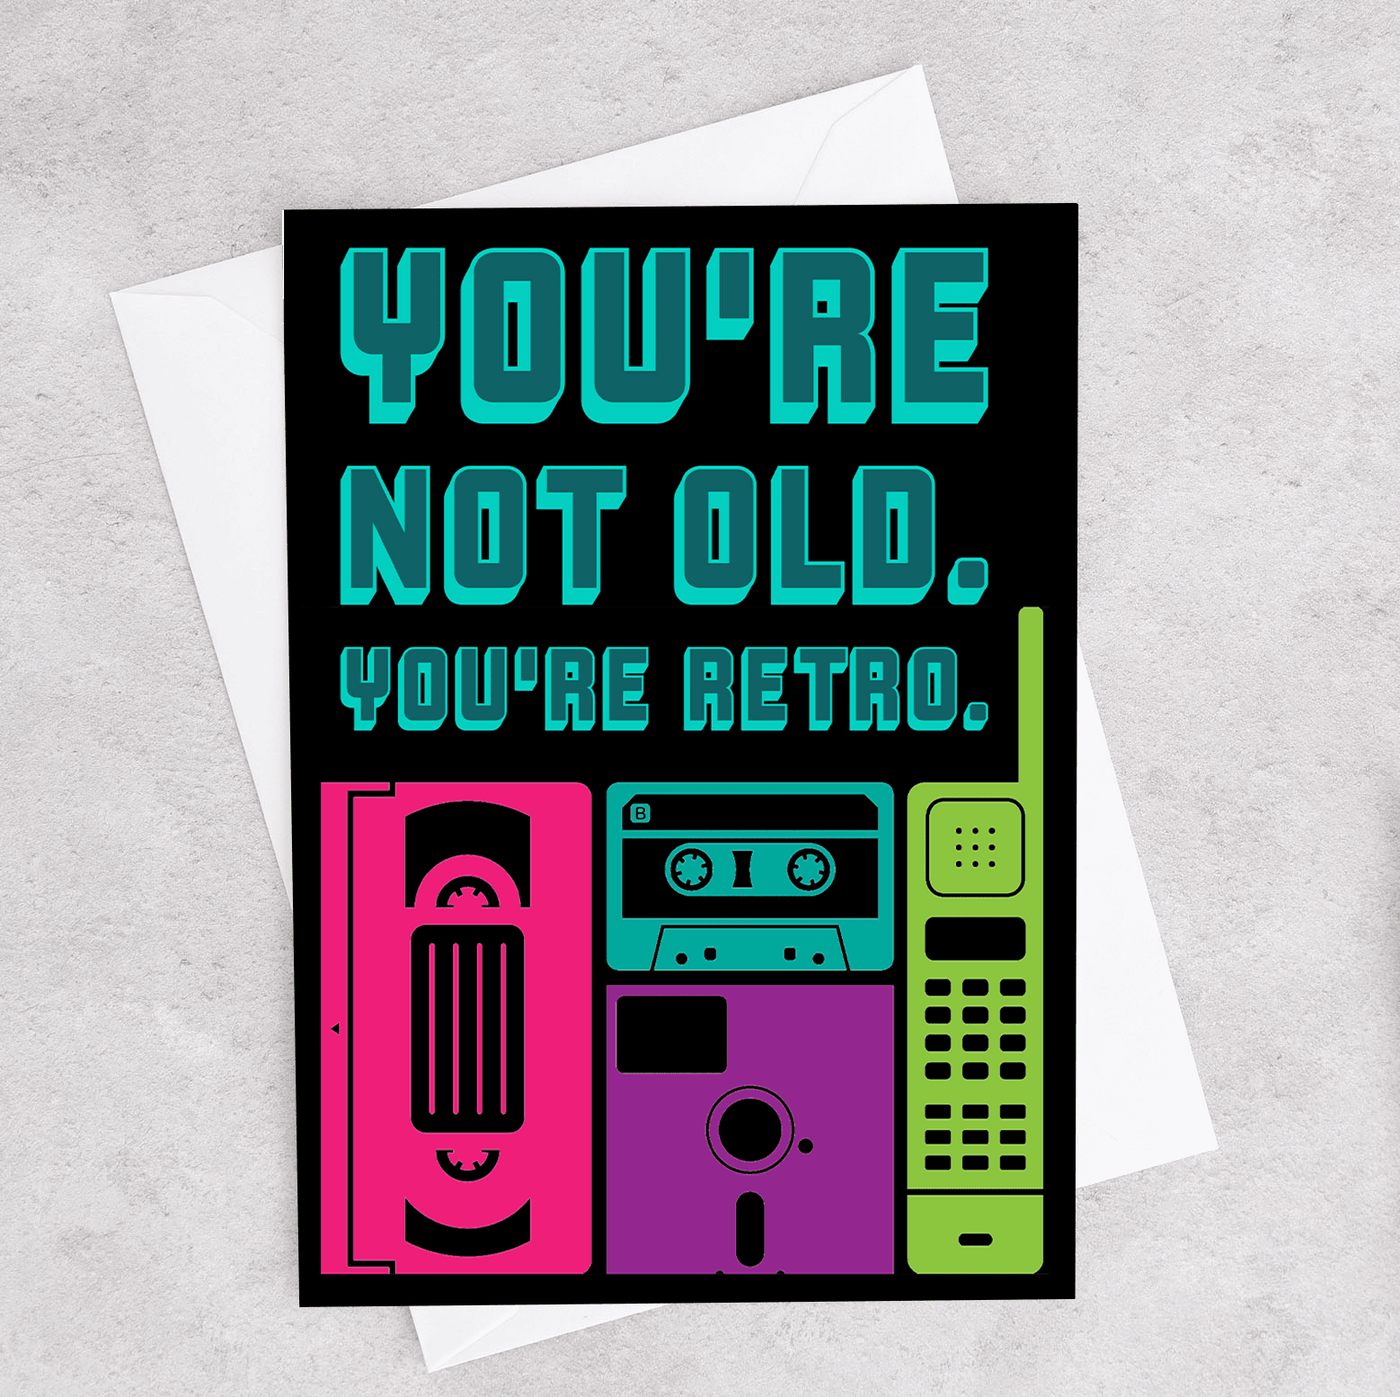 This birthday card says "You're Not Old. You're Retro." and shows a cassette tape, floppy disc, VHS, and old phone.